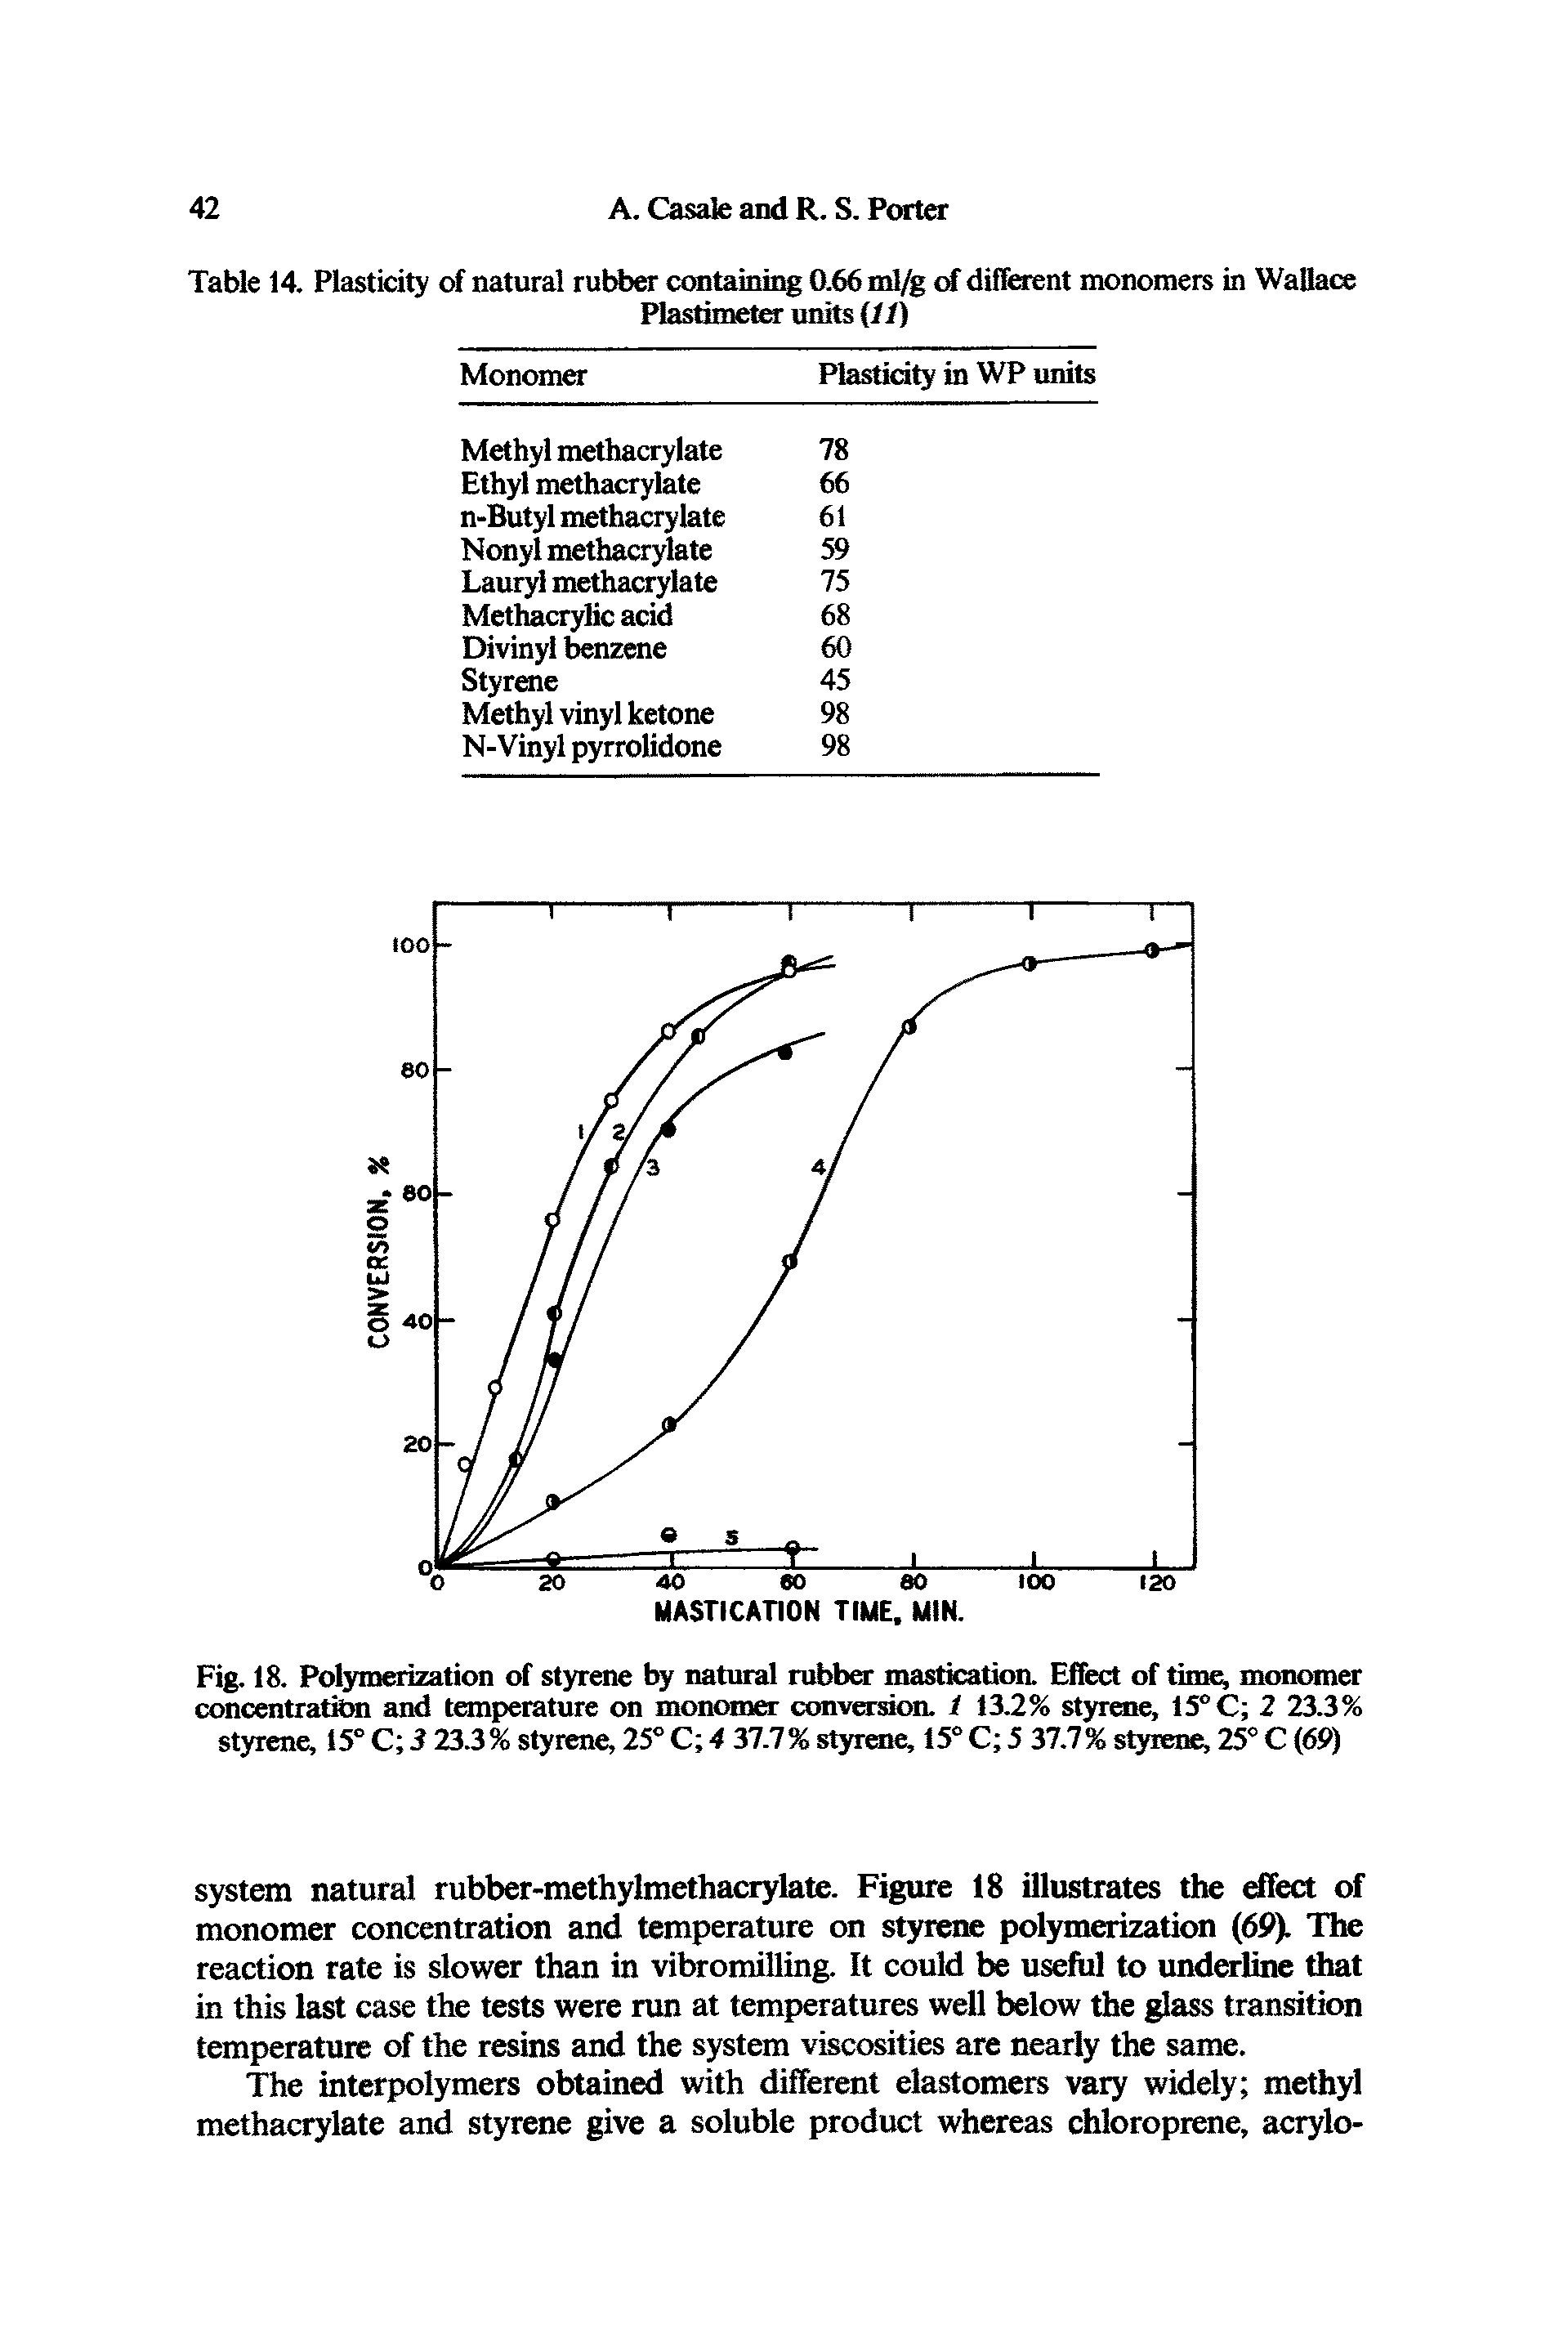 Fig. 18. Polymerization of styrene by natural rubber mastication. Effect of time, monomer concentration and temperature on monomer conversion. 1 13.2% styrene, 15° C 2 23.3% styrene, 15° C S 23.3 % styrene, 25° C 4 37.7% styrene, 15° C 5 37.7% styrene, 25° C (69)...